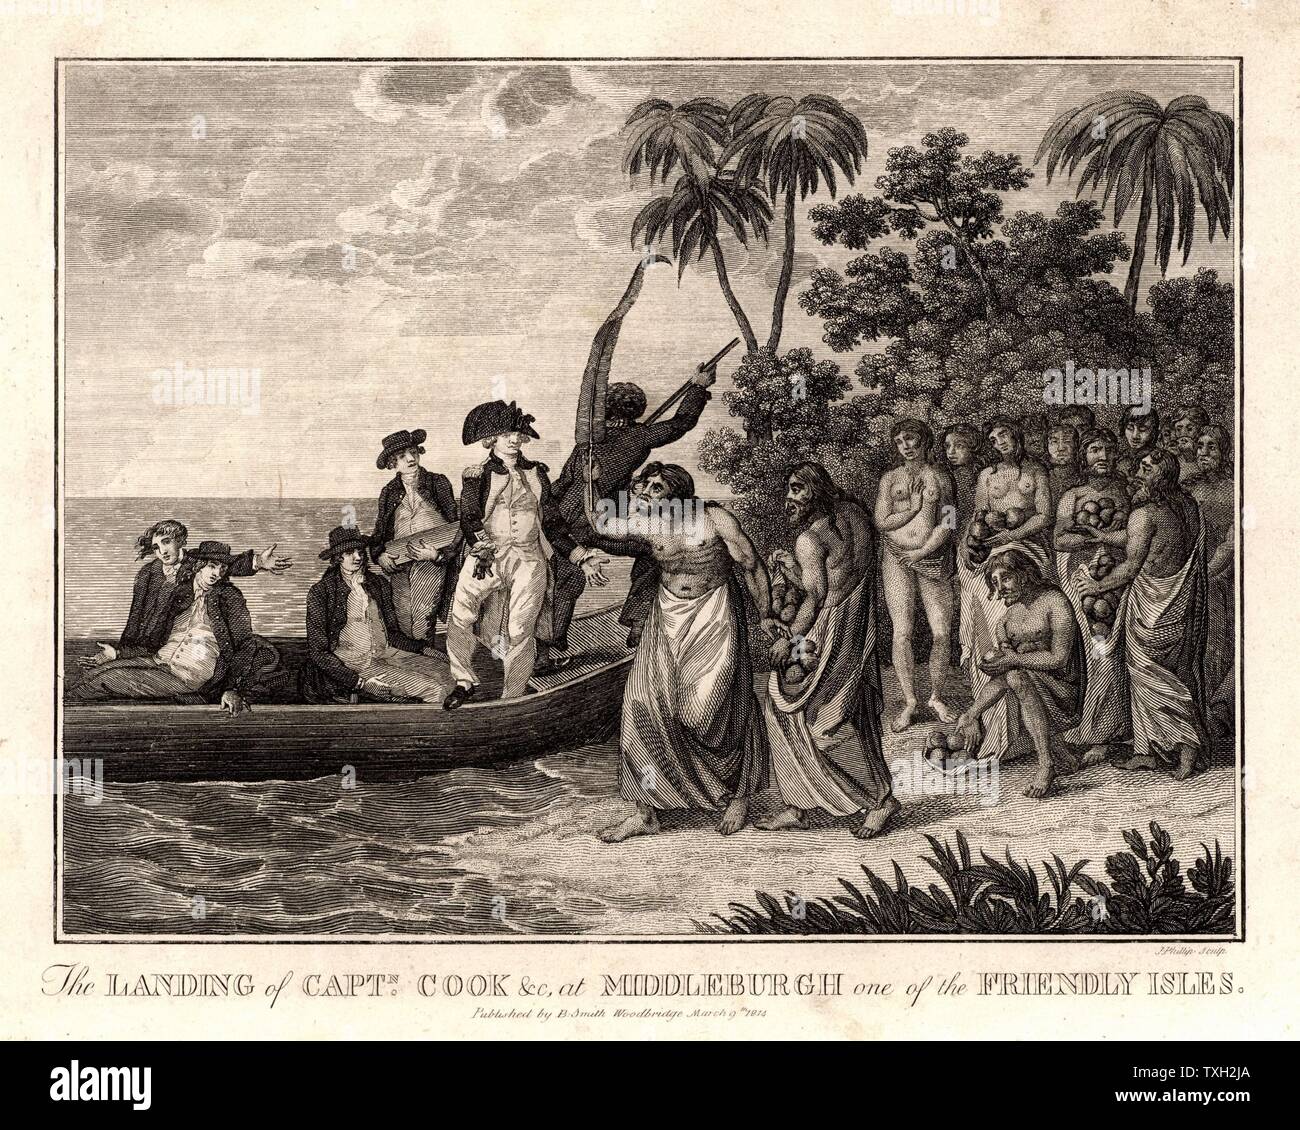 James Cook (1728-79) English explorer and navigator and hydrographer landing on the Friendly Islands (Kingdom of Tonga) in 1773. From 'Captain Cook's Original Voyages Round the World' (Woodbridge, Suffolk, c1815).  Engraving. Stock Photo